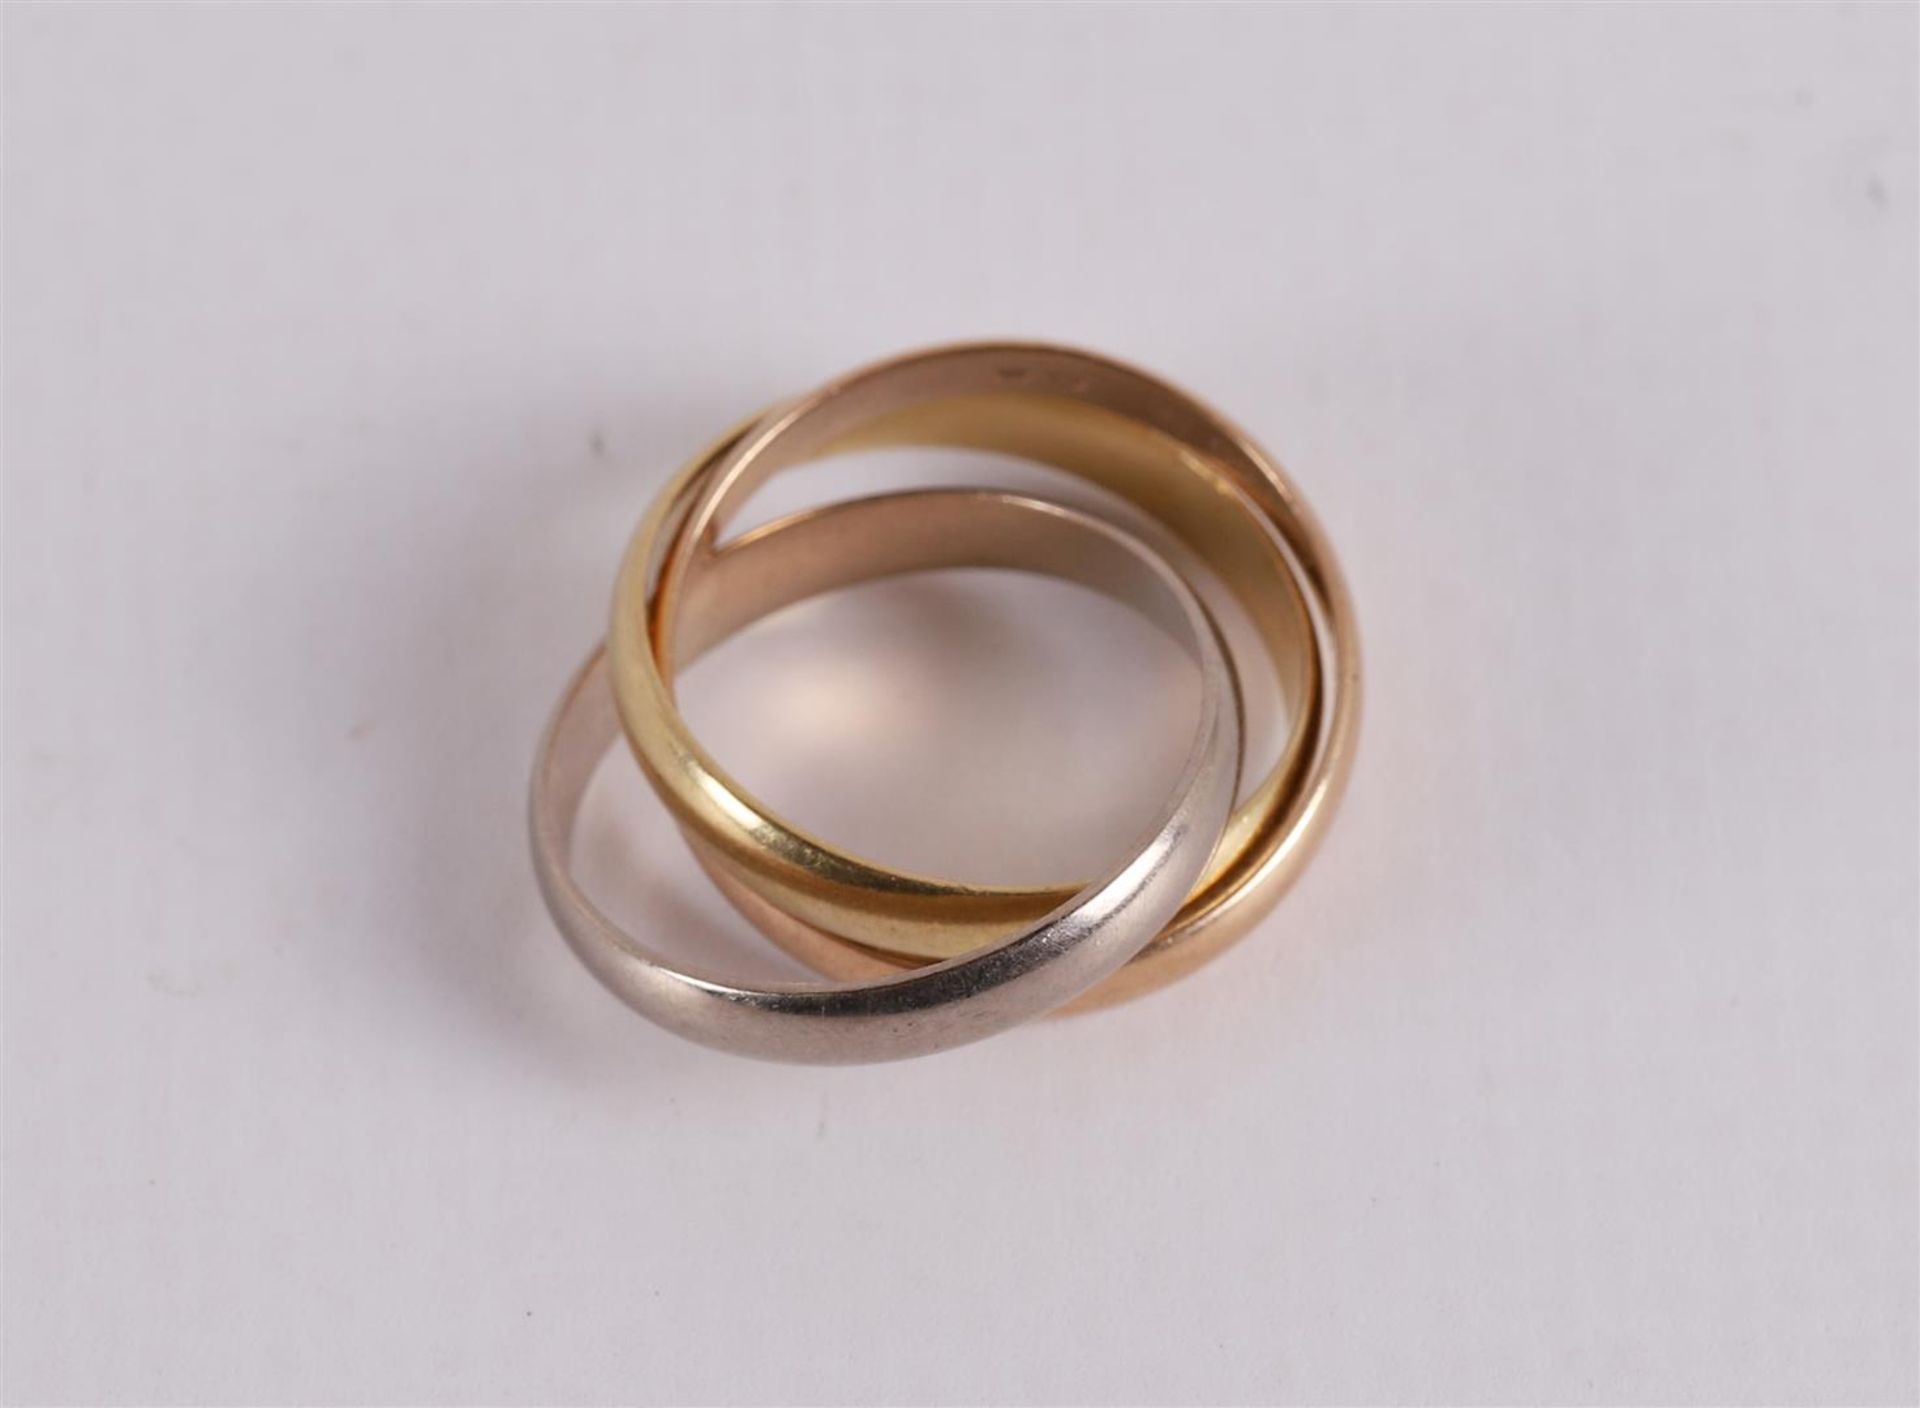 An 18 kt gold ring. Cartier Trinity, tricolor. - Image 2 of 2